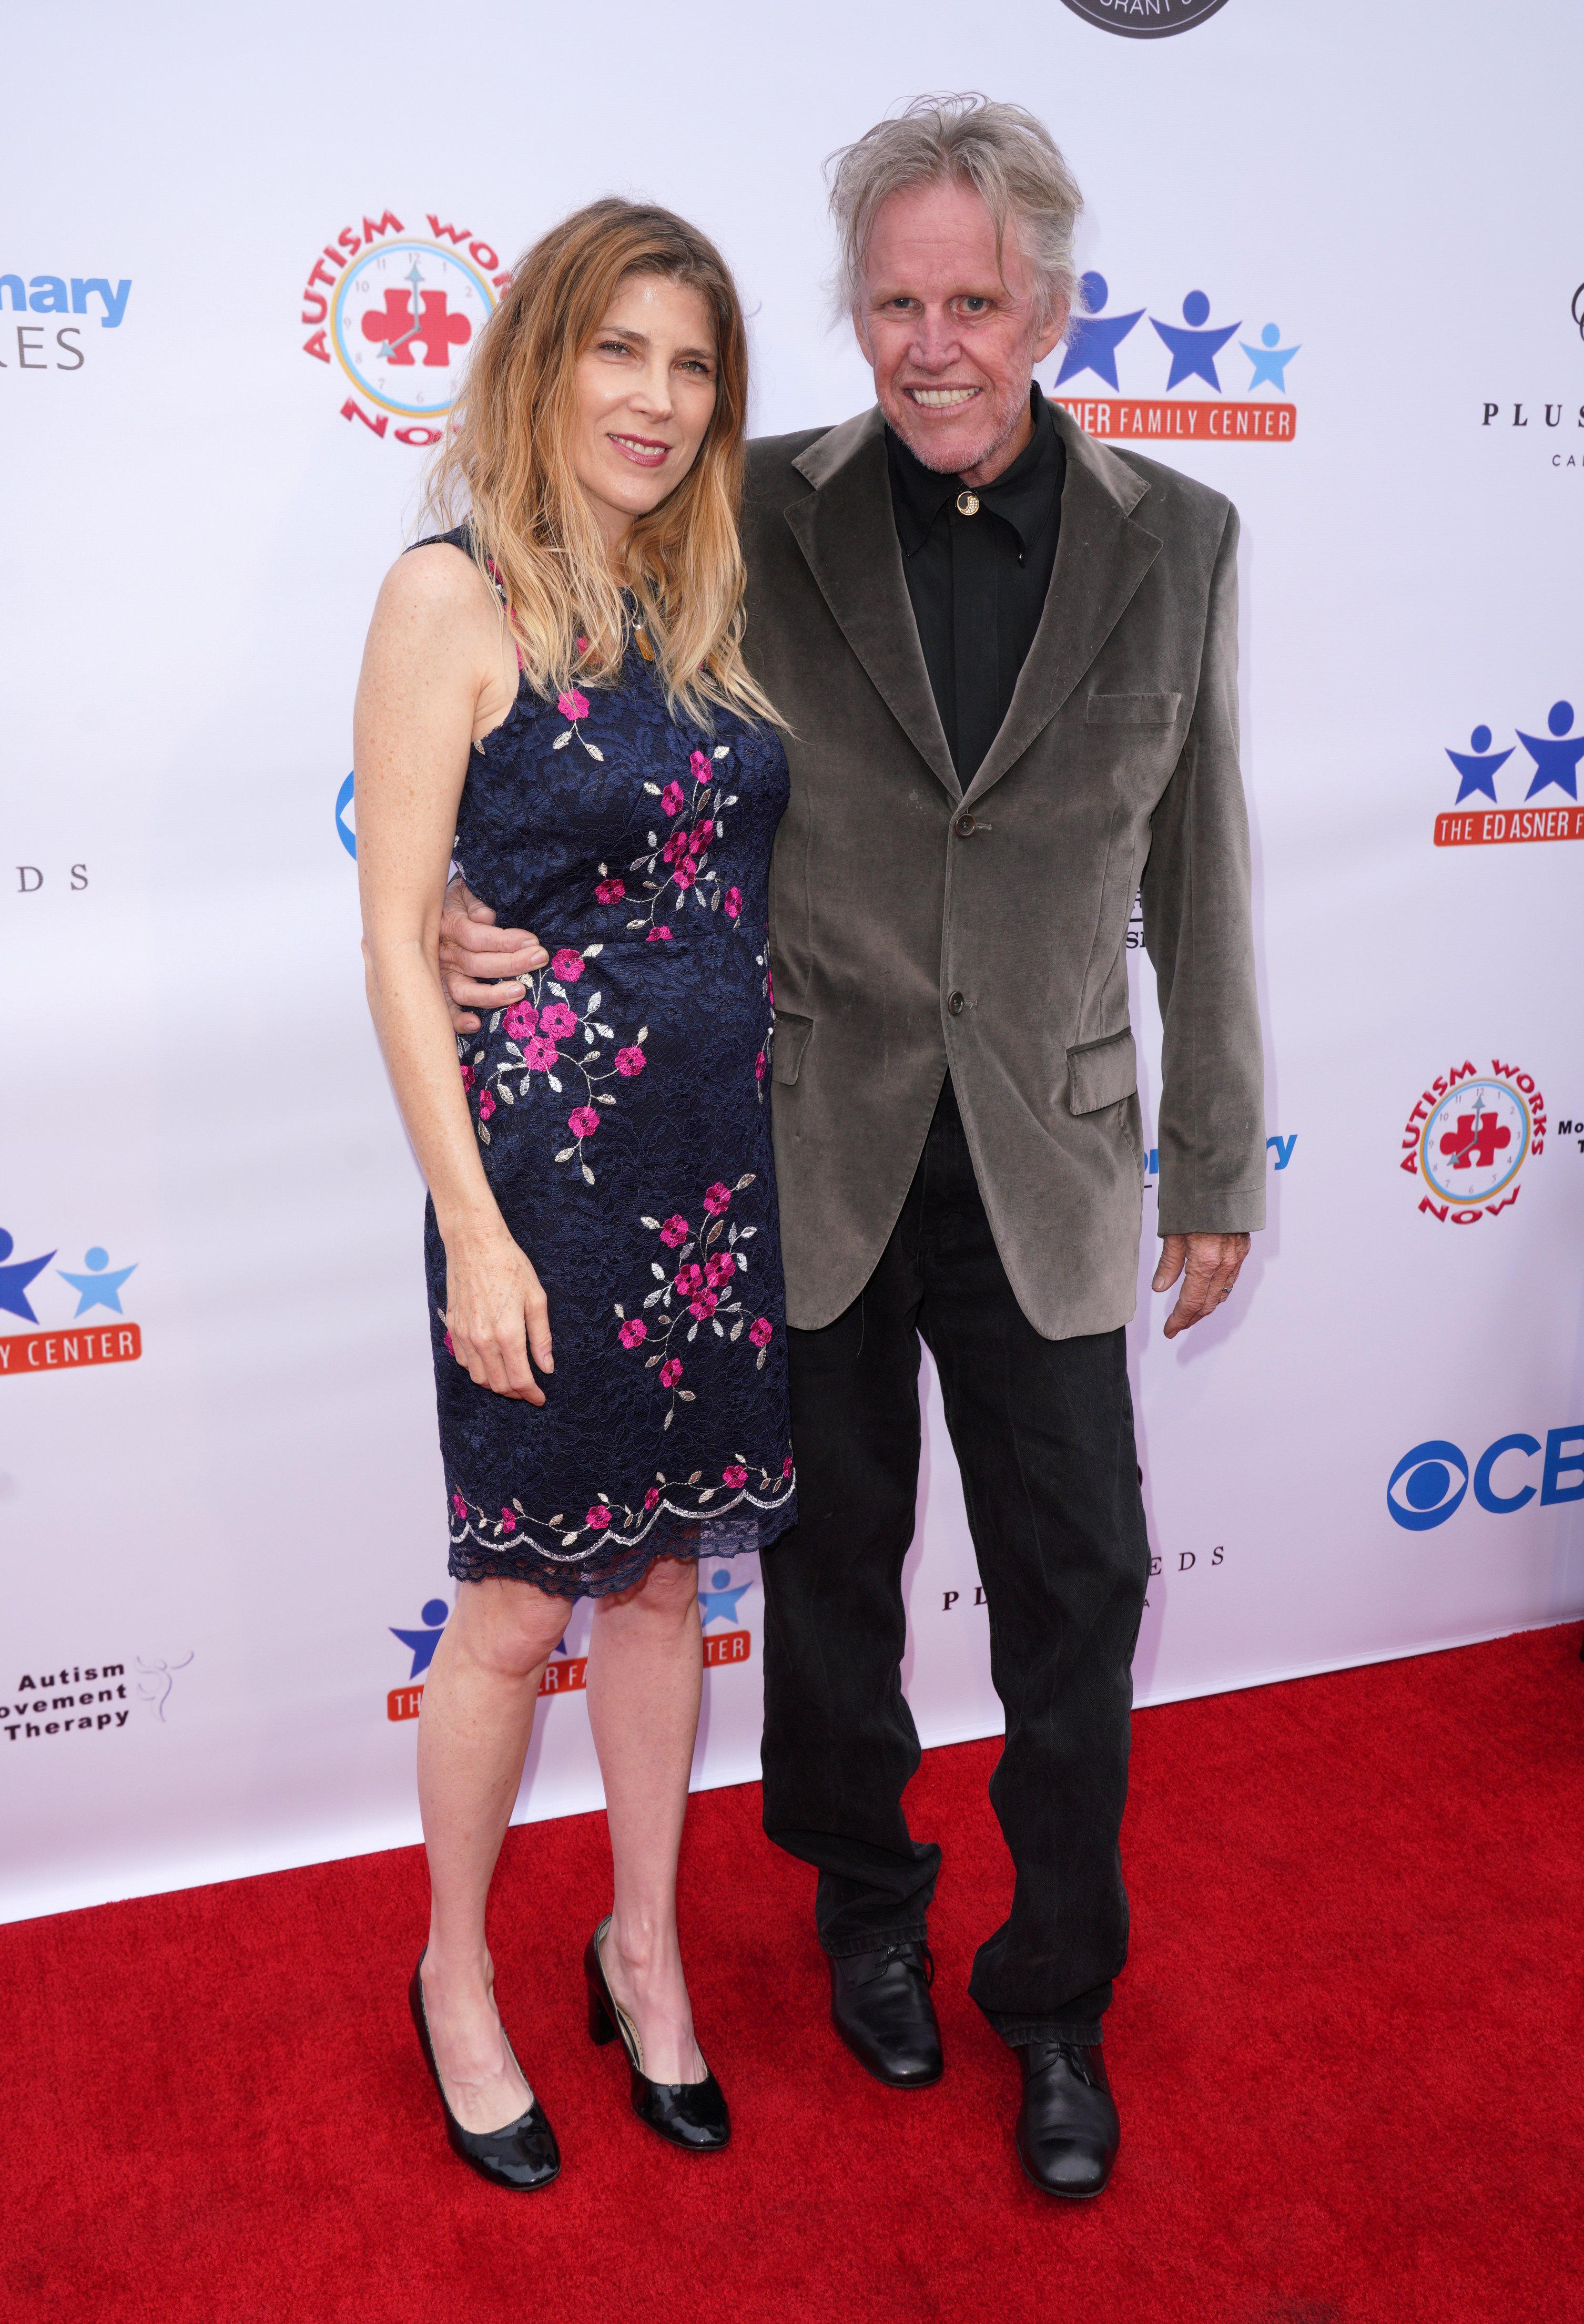 Gary Busey and Steffanie Sampson attend the 7th Annual Ed Asner And Friends Poker Tournament Celebrity Night at CBS Studios - Radford on June 1, 2019 in Studio City, California | Source: Getty Images